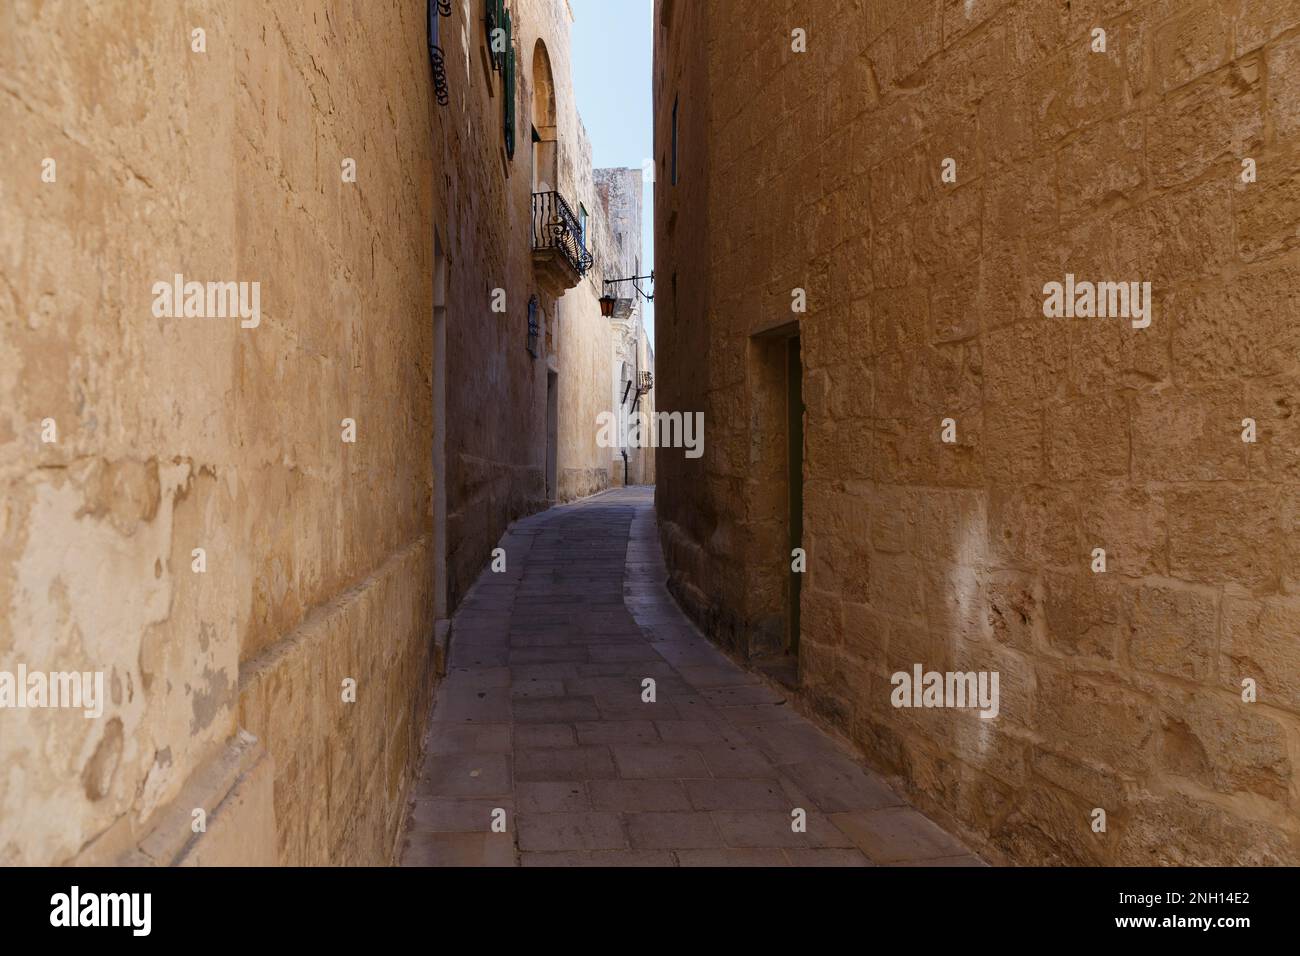 Impressions of the narrow medieval streets of Mdina, Malta in 2017. Stock Photo